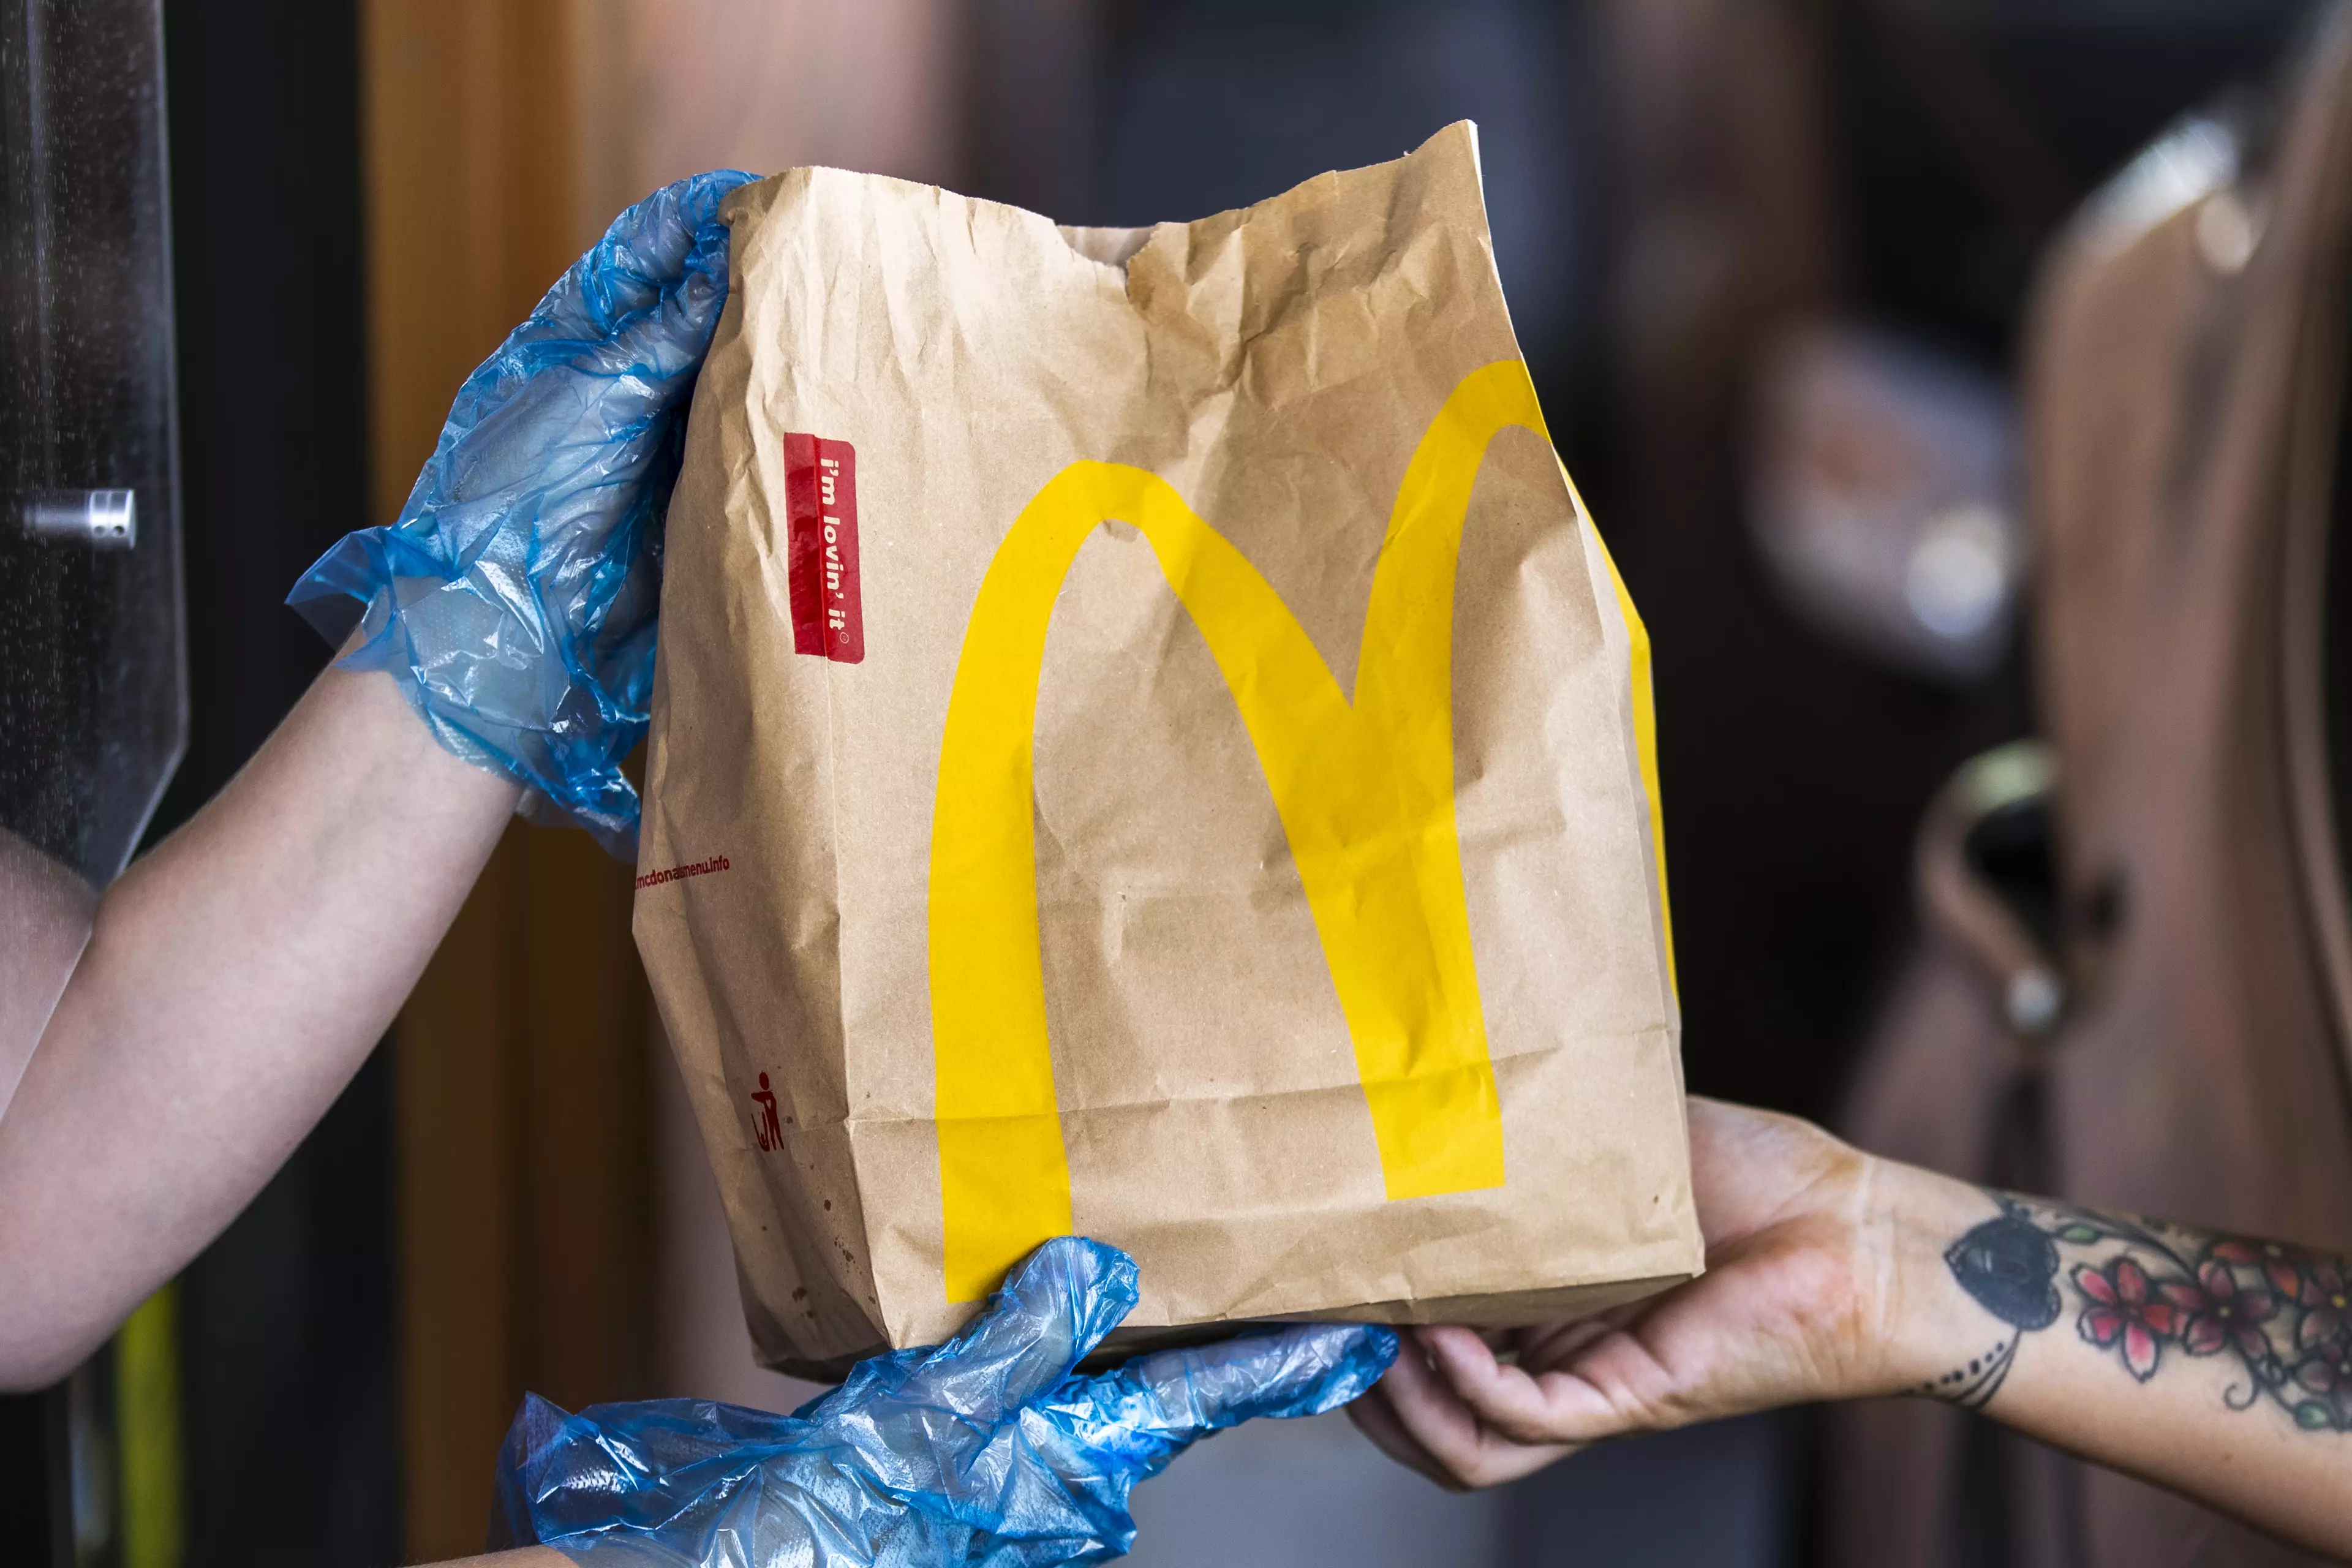 People will now be able to get their long-awaited McDonald's fix.